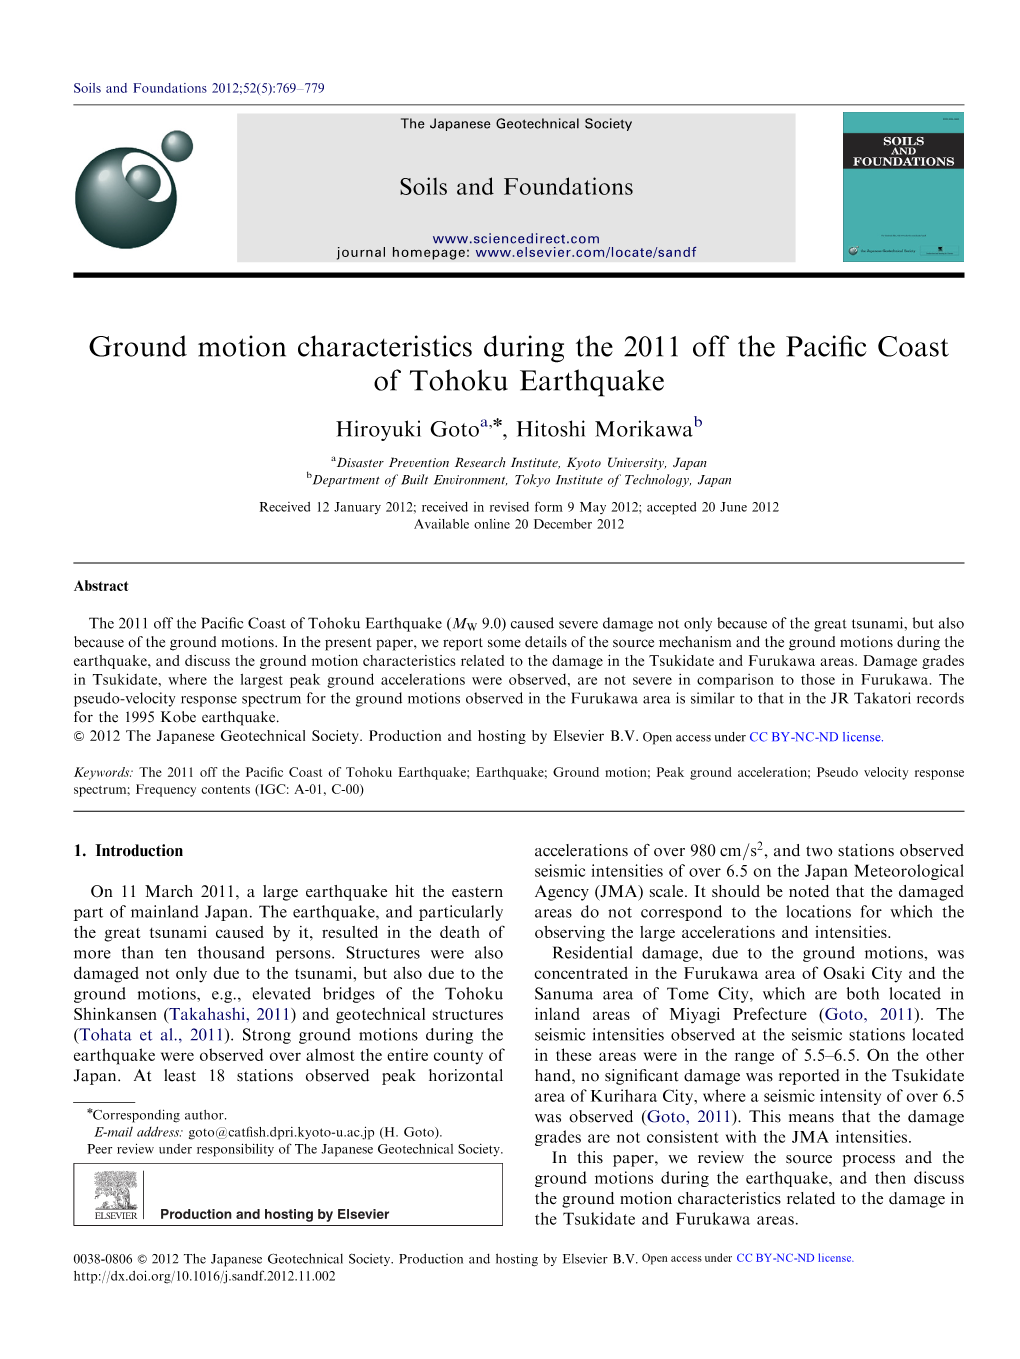 Ground Motion Characteristics During the 2011 Off the Pacific Coast Of